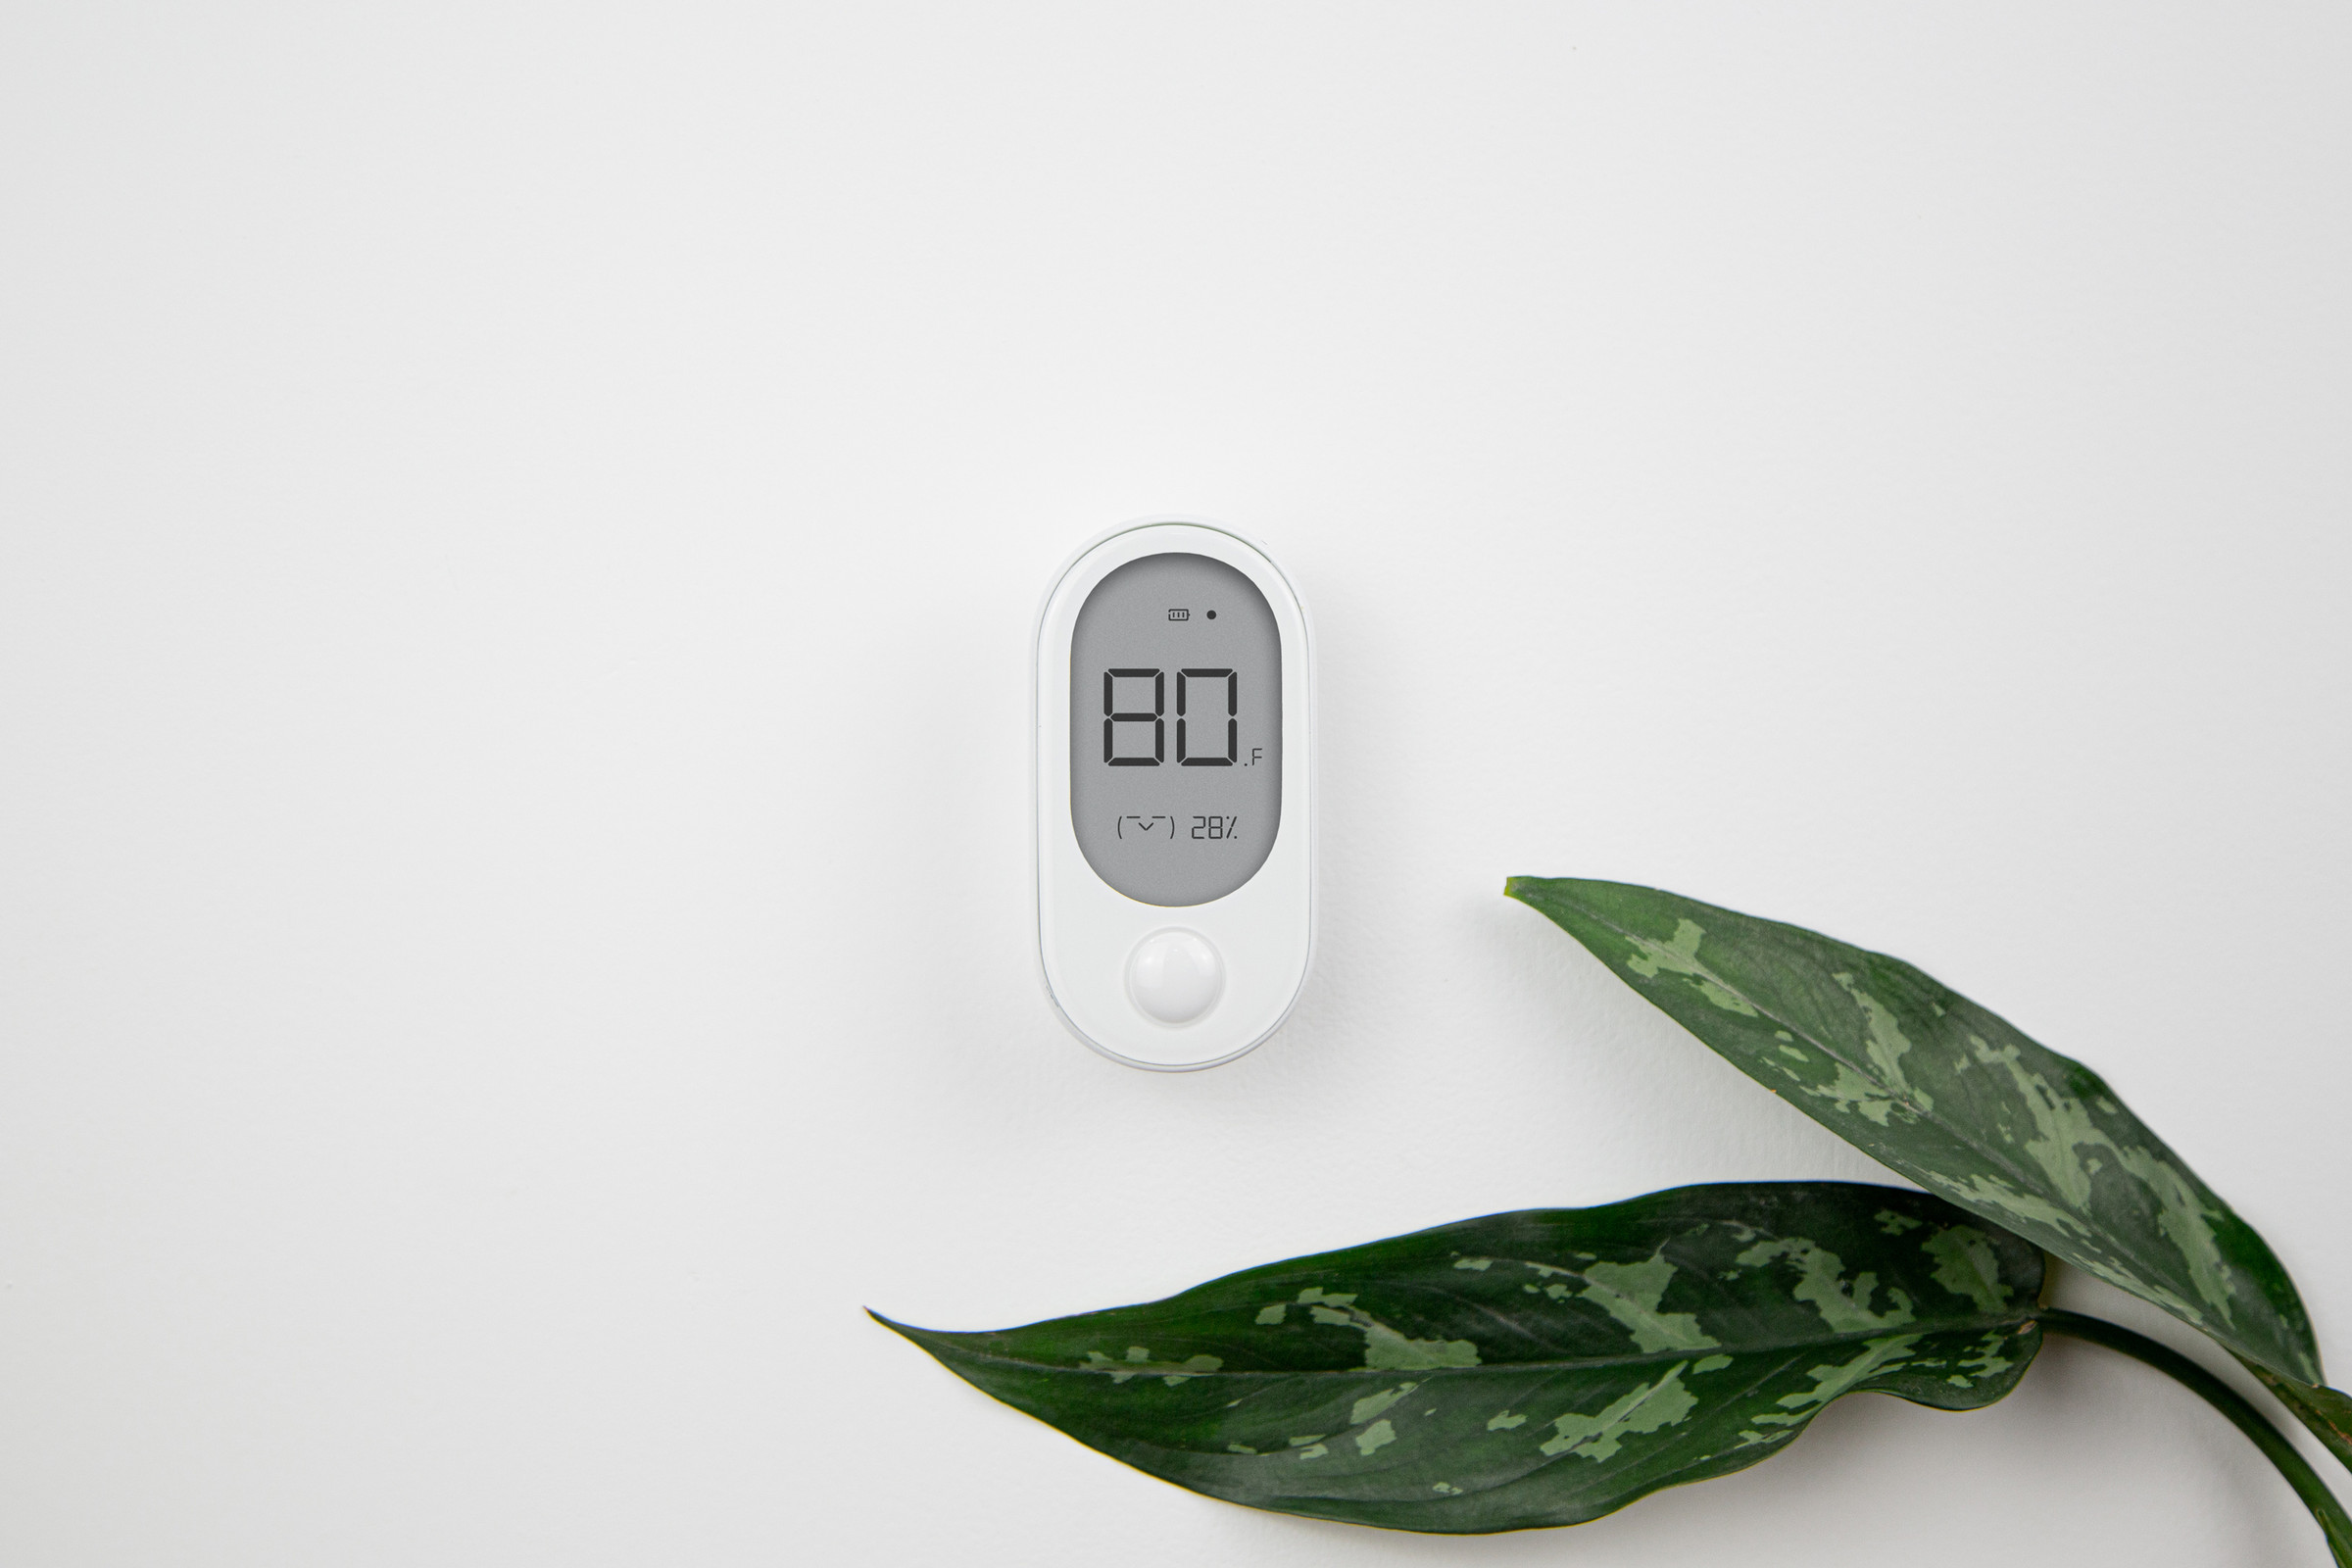 The new Wyze Room Sensor costs $24.99 and detects temperature, humidity, and motion.